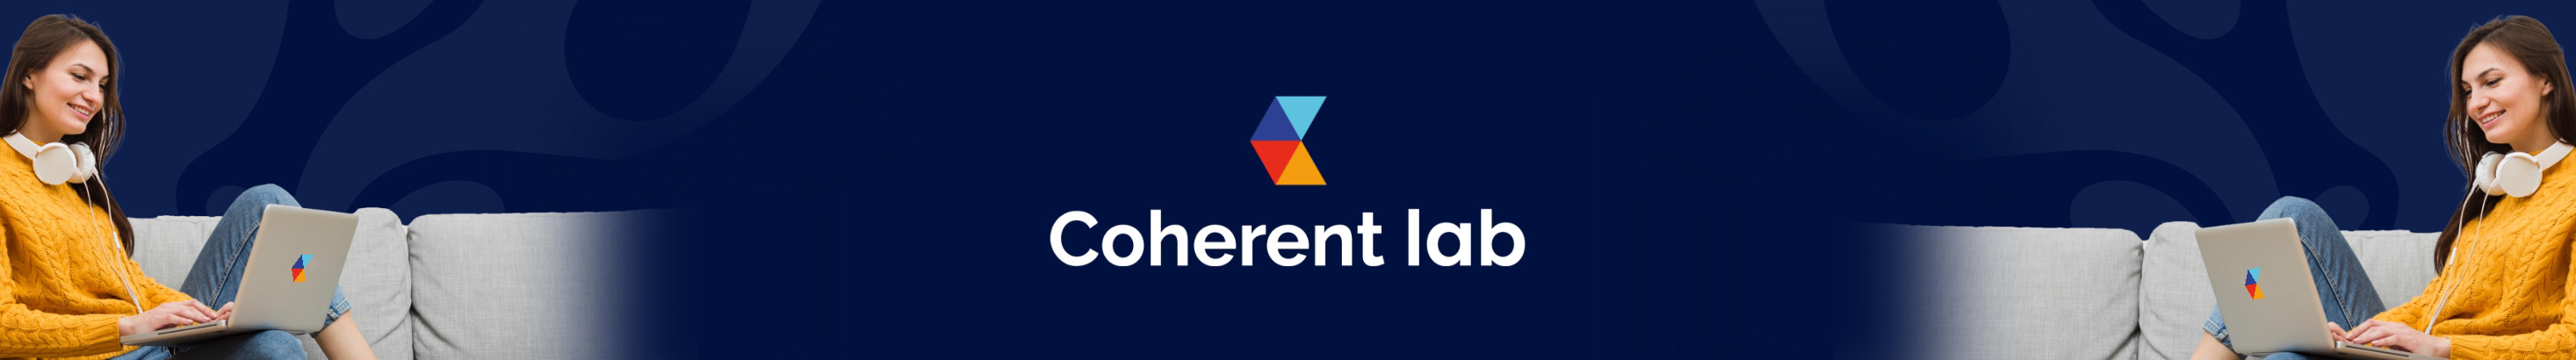 Coherent Lab LLPs profilbanner